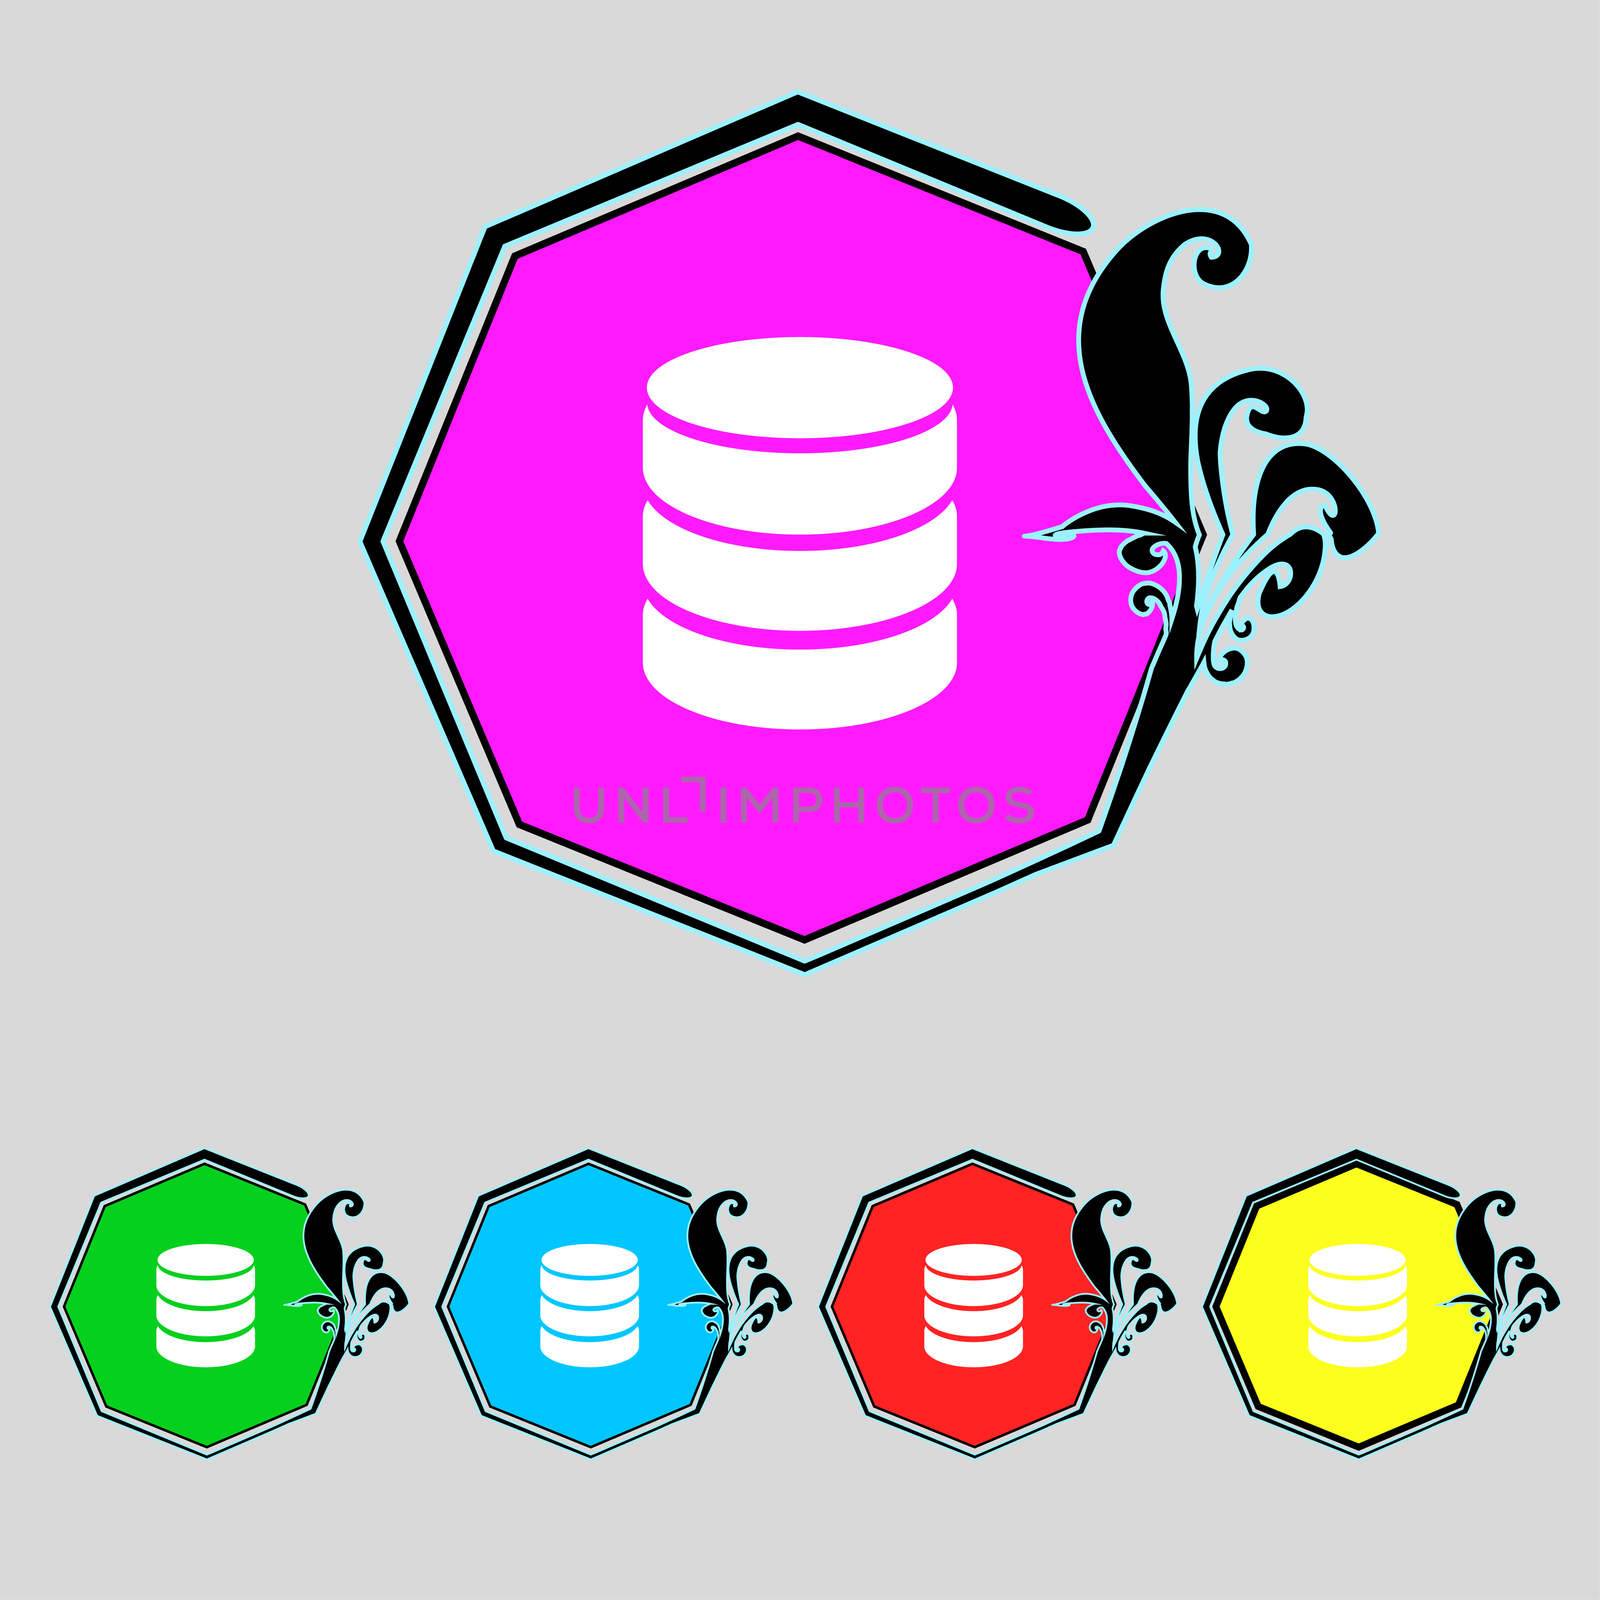 Hard disk and database sign icon. flash drive stick symbol. Set colourful buttons. illustration